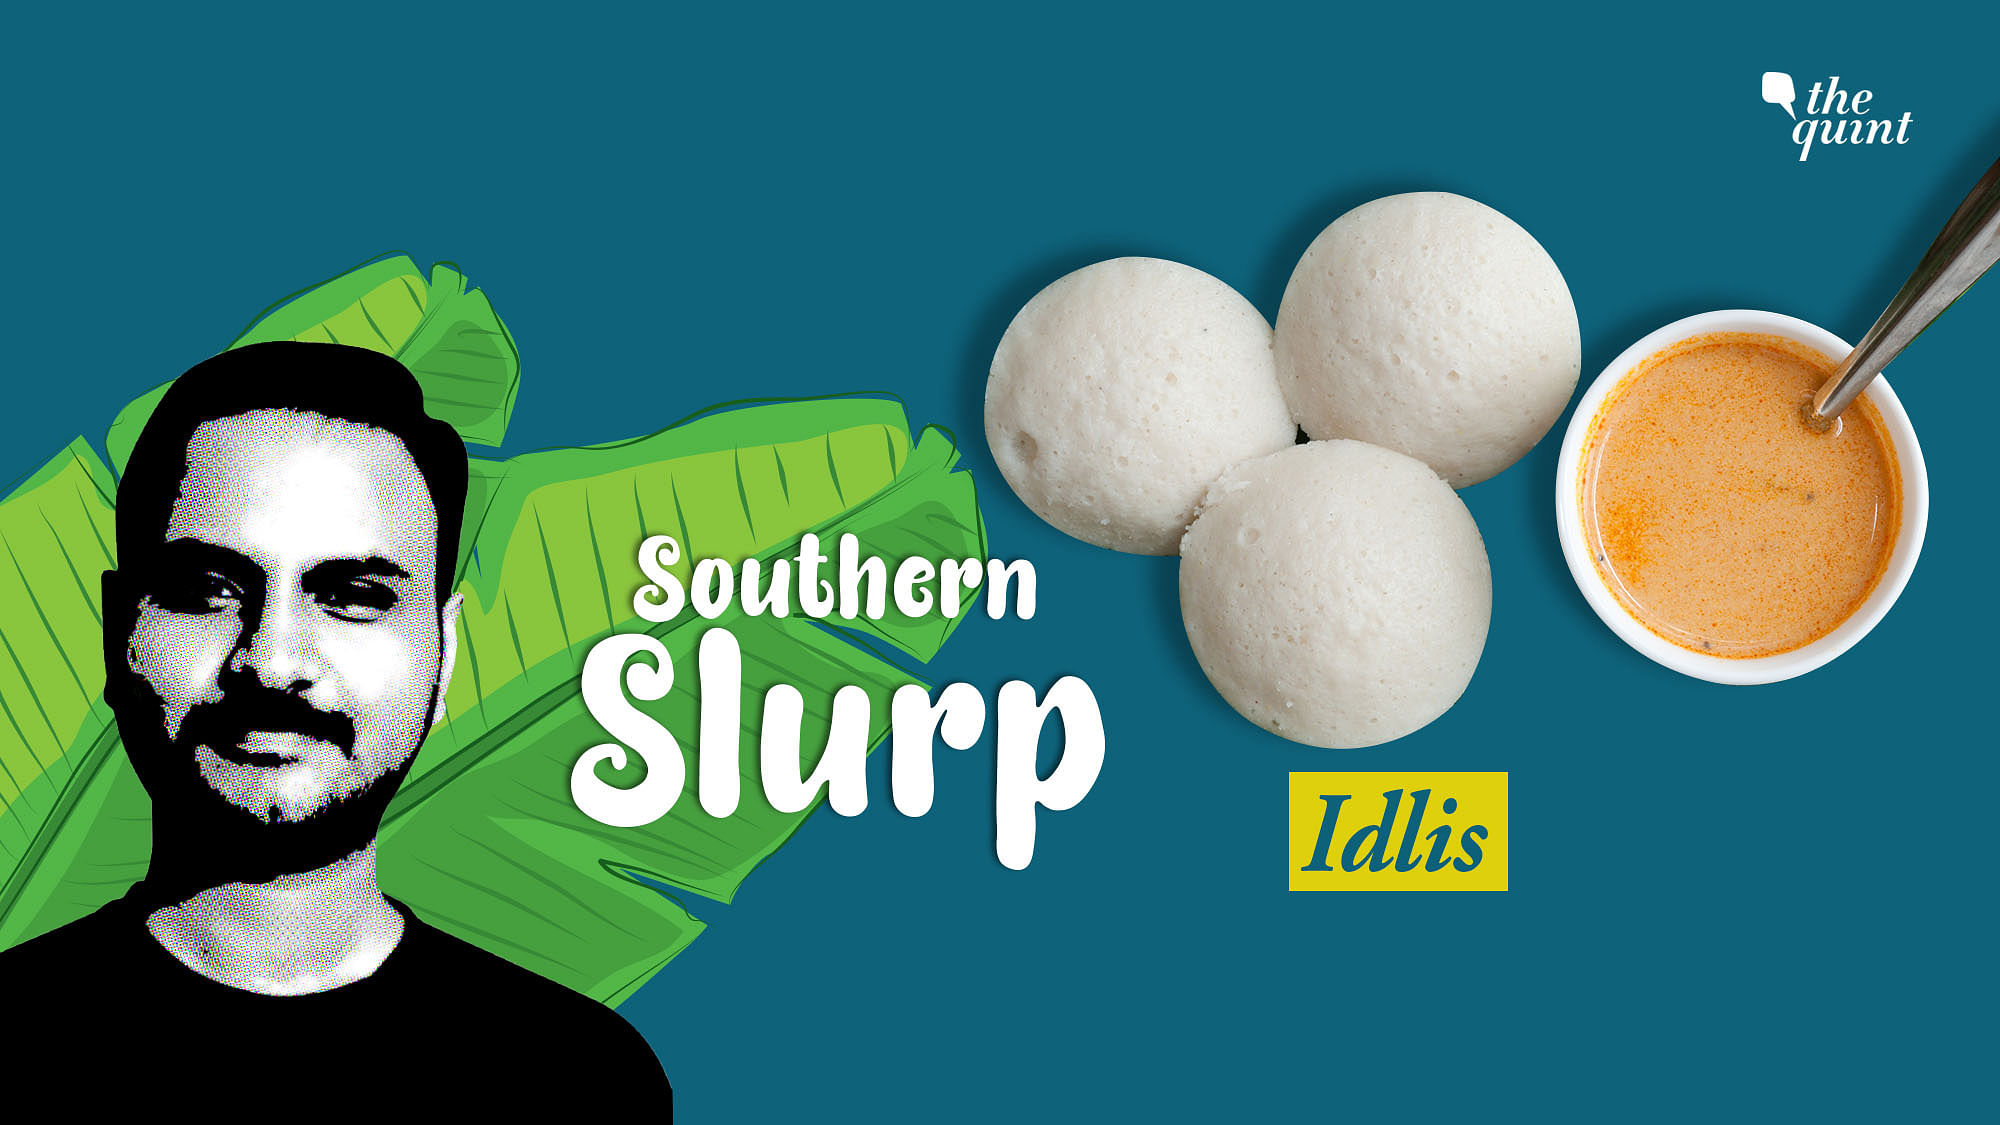 Idlis are Amazing! But are they Indian?